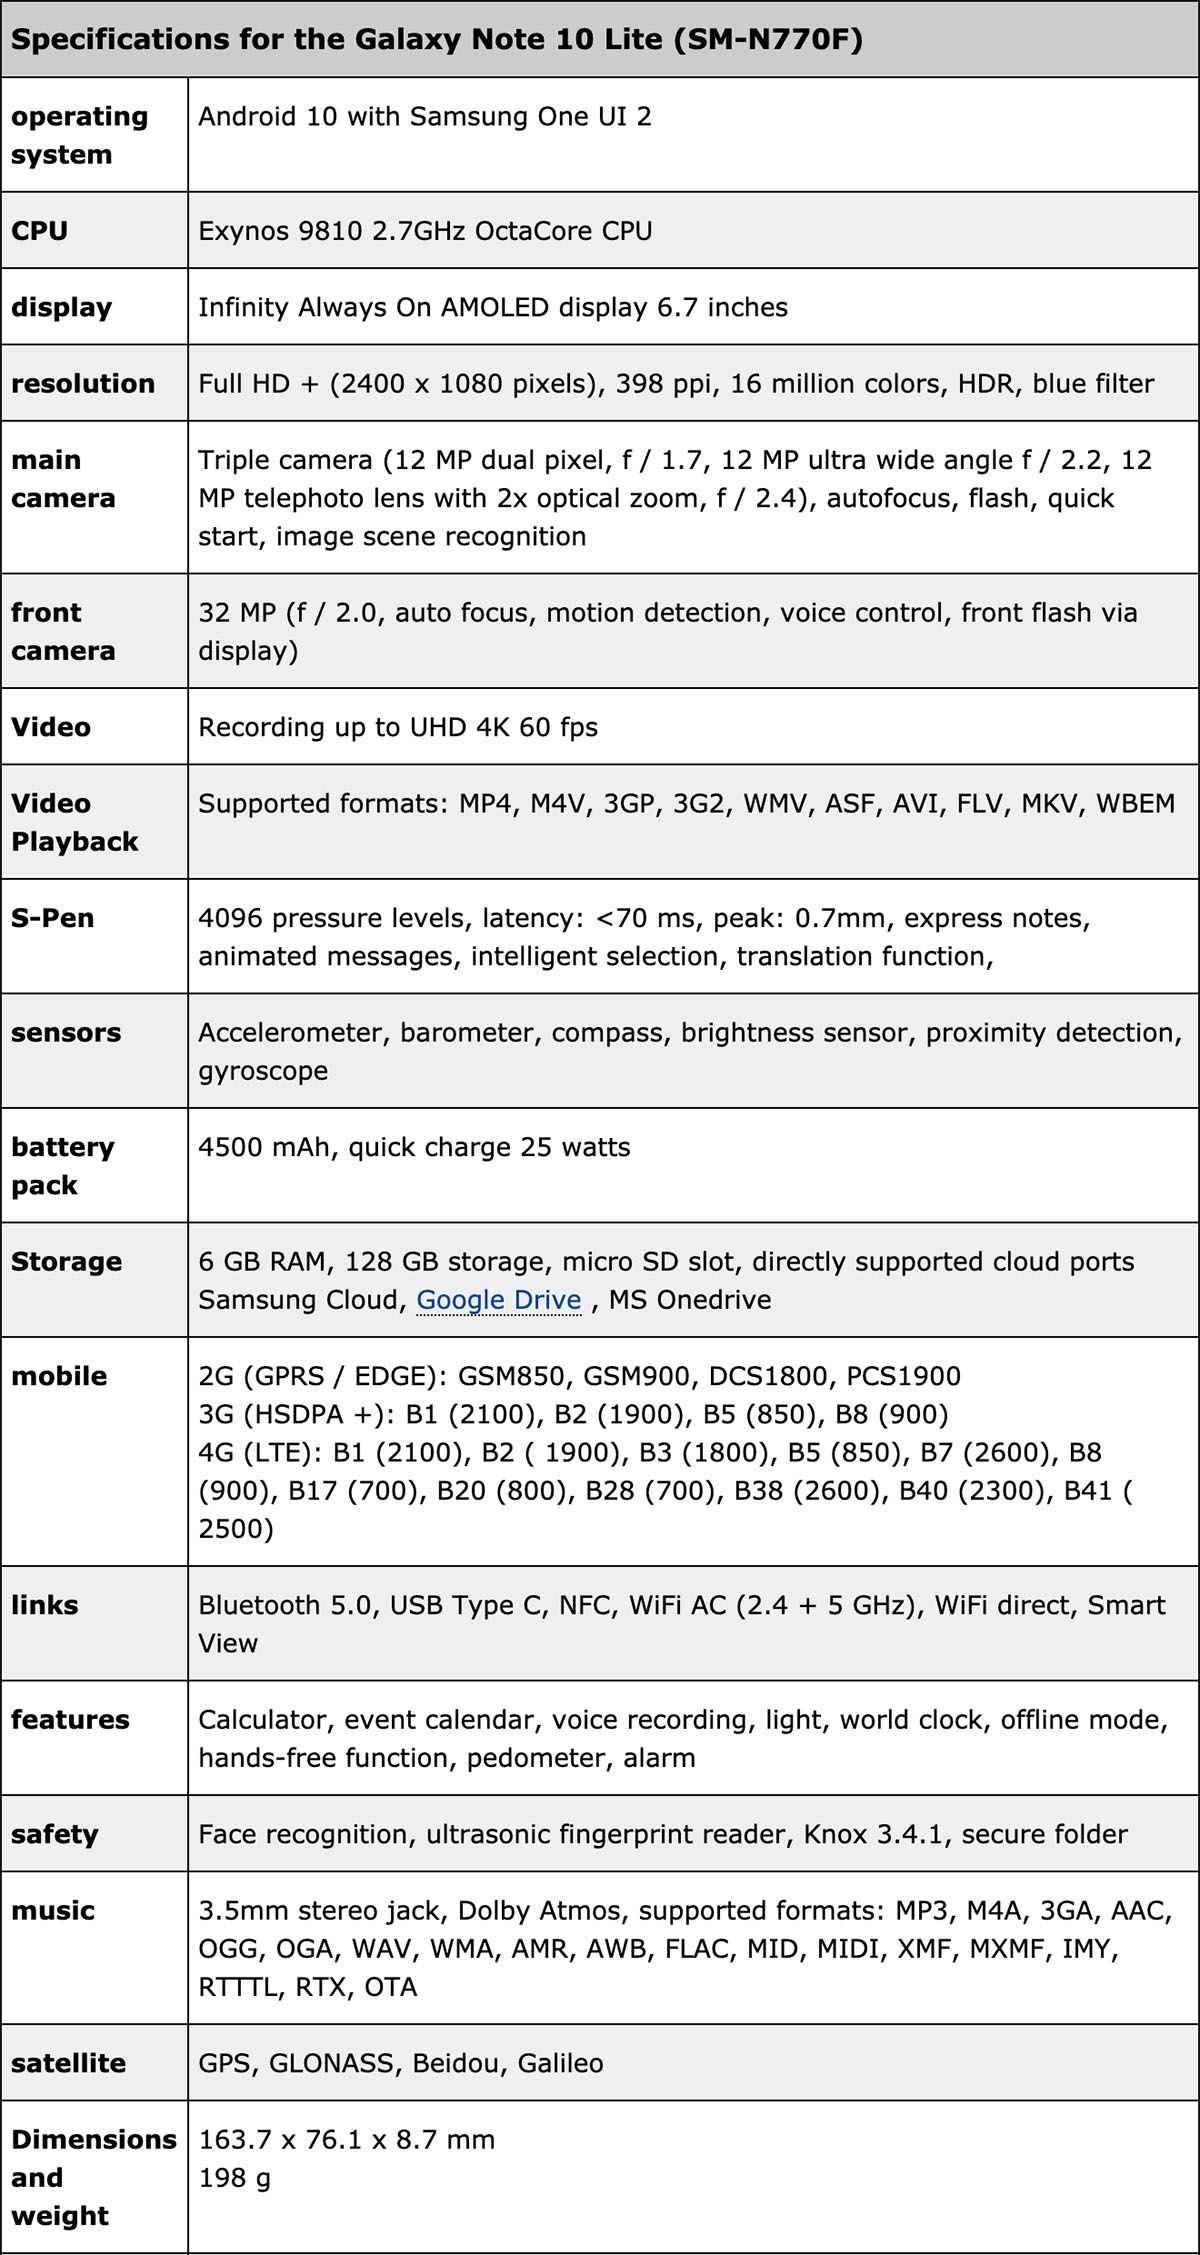 Samsung Galaxy Note 10 Lite full specifications leak image 2